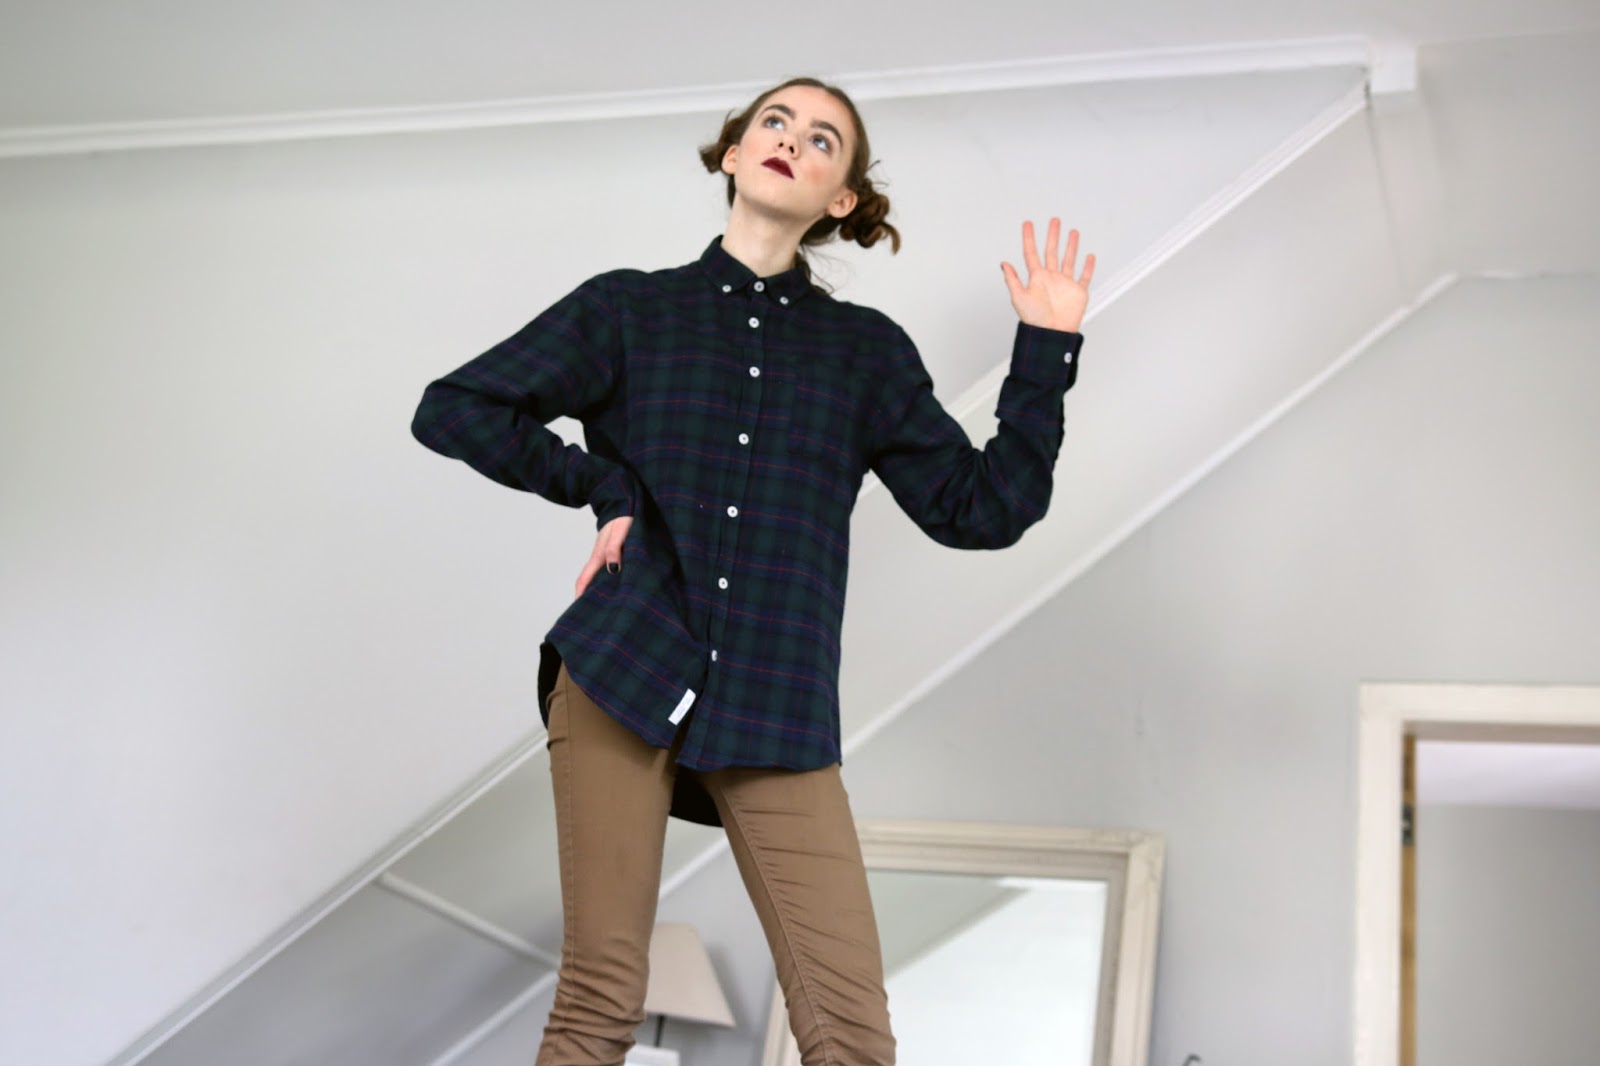 tartan, fashion blogger, british, ootd, grace mandeville, mandeville sisters, tommy hilfiger dungarees, overalls, shorts, tommy, hilfiger, urban outfitters, urban outfitters exclusive, boys, clothes, shirts, buns, mandeville, lol, fashion, eyebrows, 